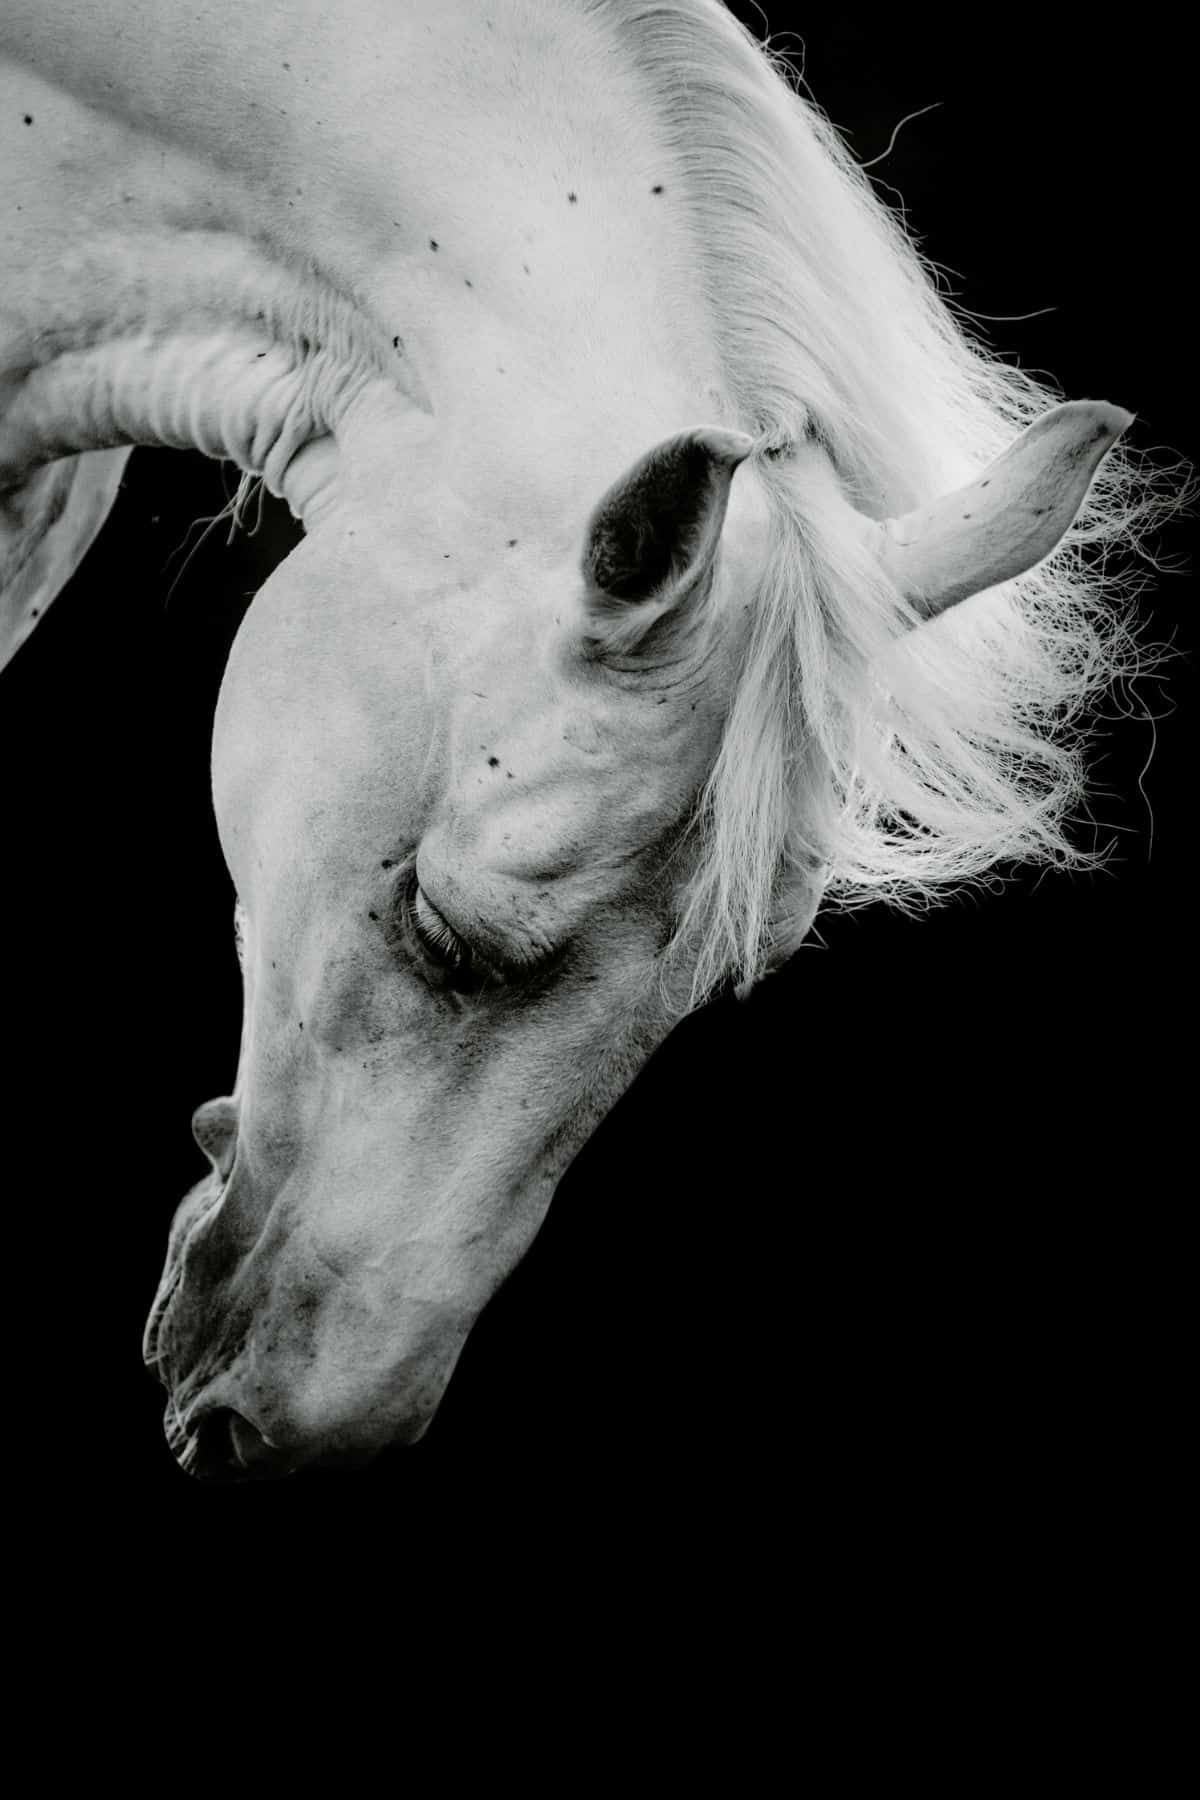 black background with white horse leaning down